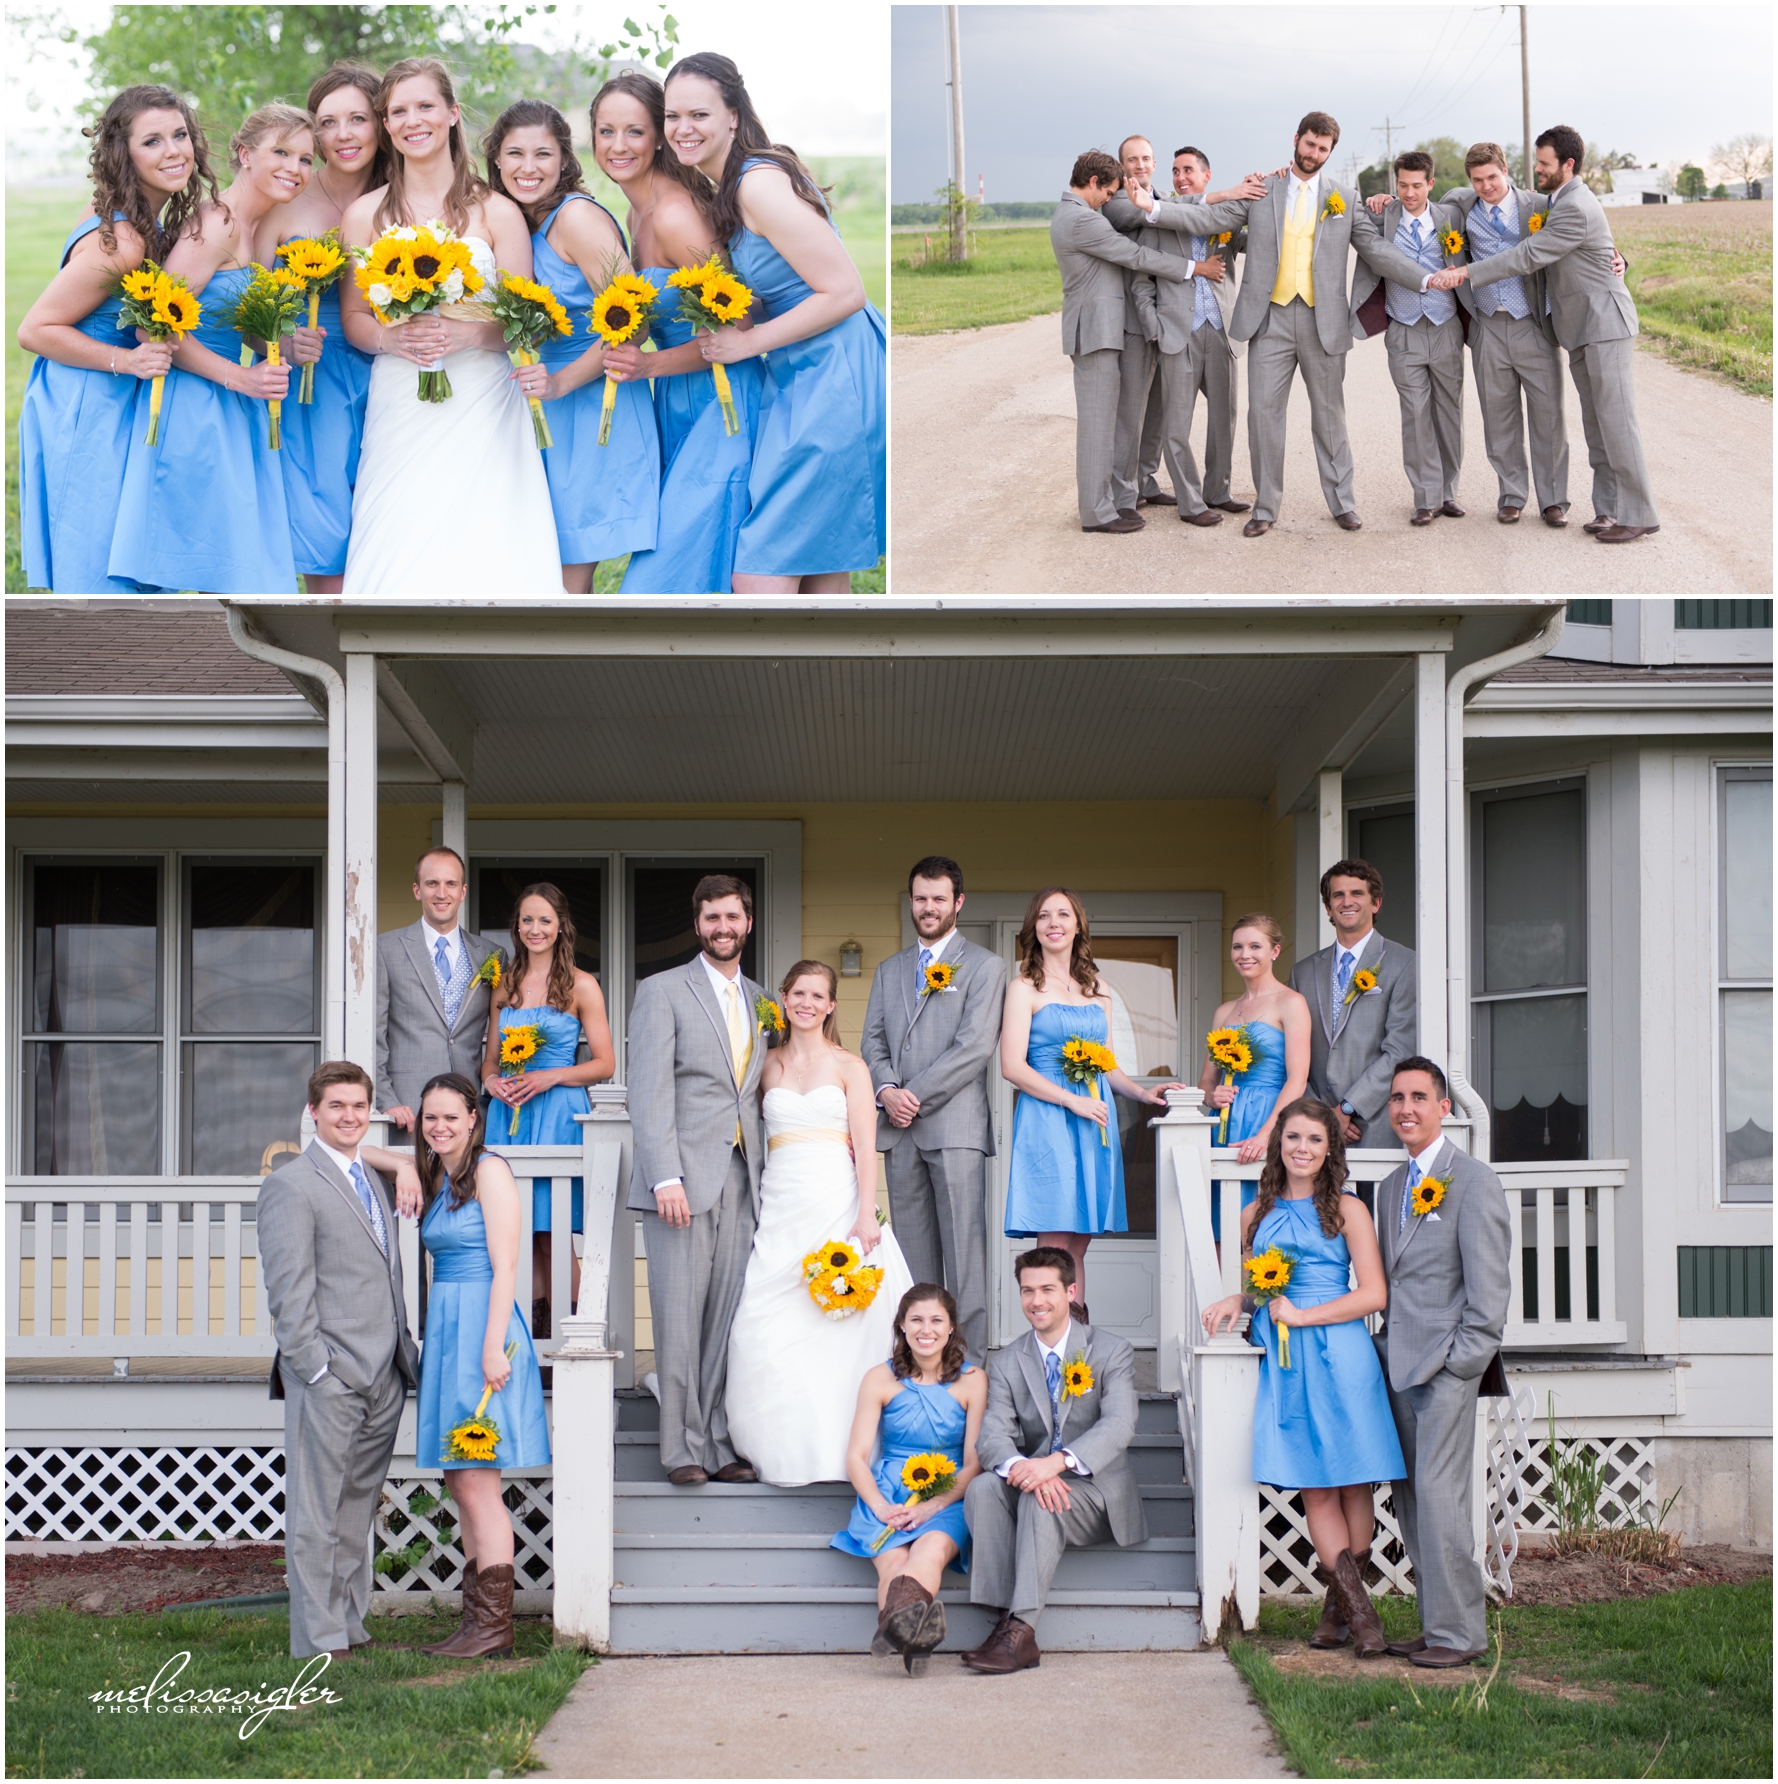 Bridal party wearing cornflower blue and carrying sunflowers by Lawrence Kansas wedding photographer Melissa Sigler